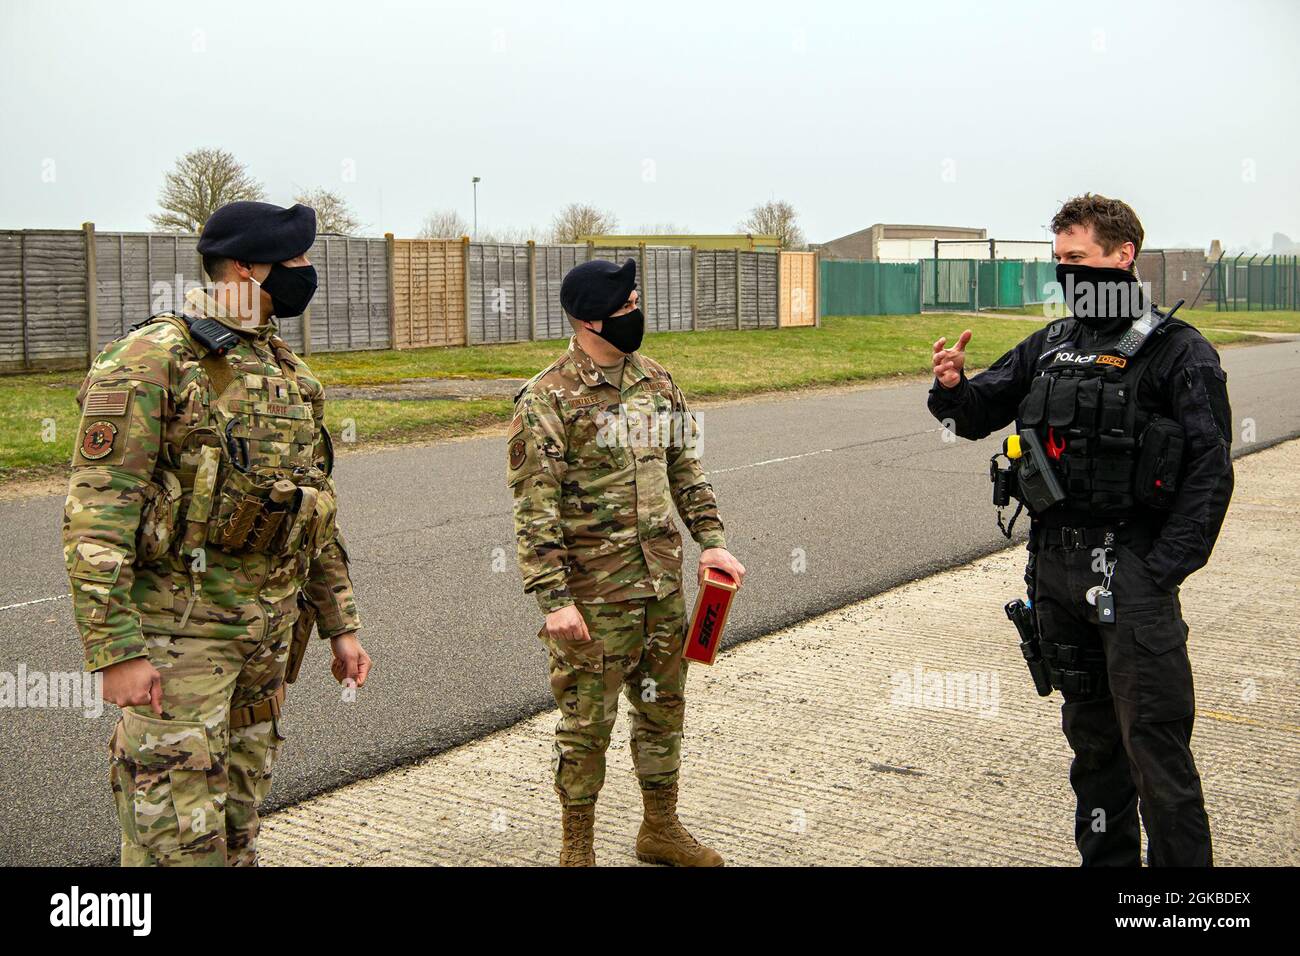 A policeman from the Northamptonshire Police Department, speaks with 1st Lt. George Marte, left, 422d Security Forces Squadron operations officer, and Staff Sgt. Alvaro Gonzalez, 422d SFS unit trainer, after a field training exercise at RAF Croughton, England, Mar. 3, 2021.  The NHPD utilized the 422d SFS training complex to help strengthen their tactics and techniques. Events like this help strengthen the local partnership between the 422d SFS and the NHPD. Stock Photo